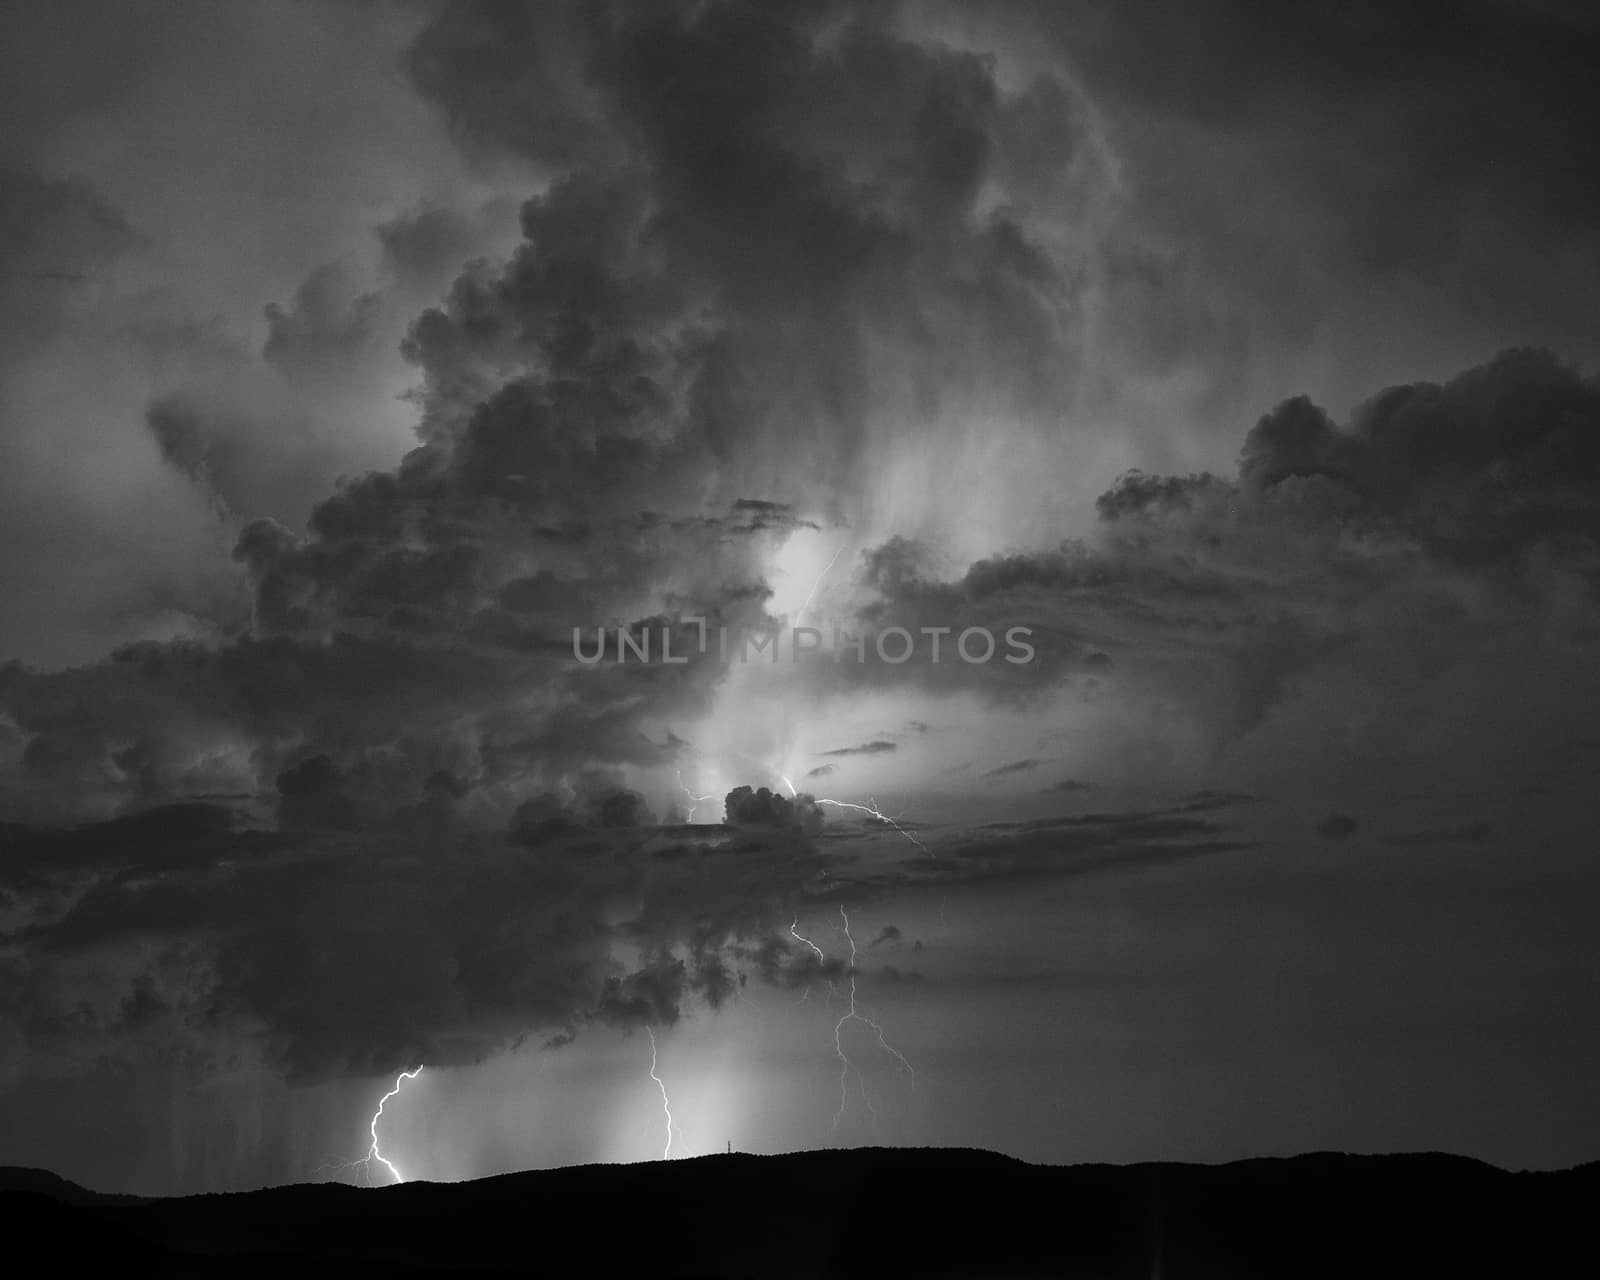 Monochrome view of multiple lightning strikes during summer thunderstorms in western North Carolina.